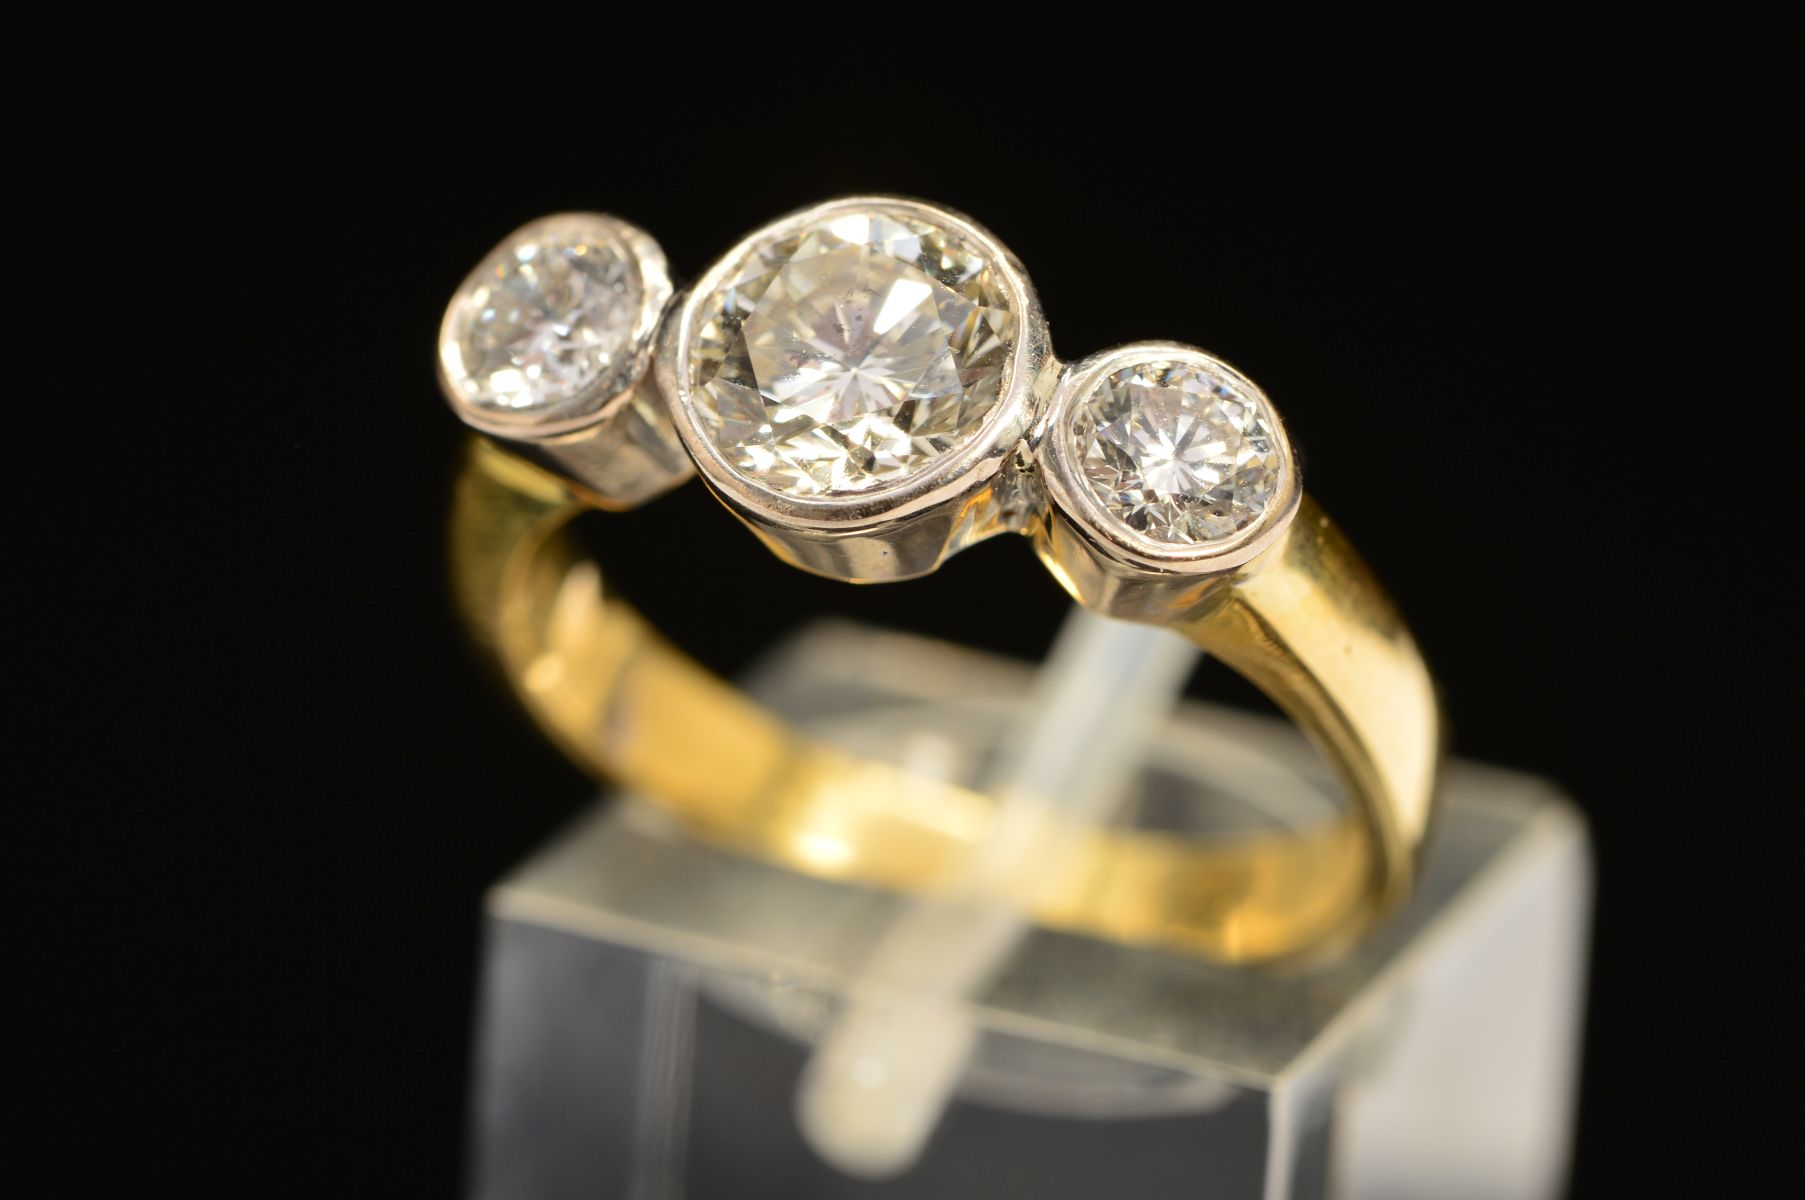 AN 18CT GOLD THREE STONE DIAMOND RING, designed as three brilliant cut diamonds within collet - Image 3 of 5